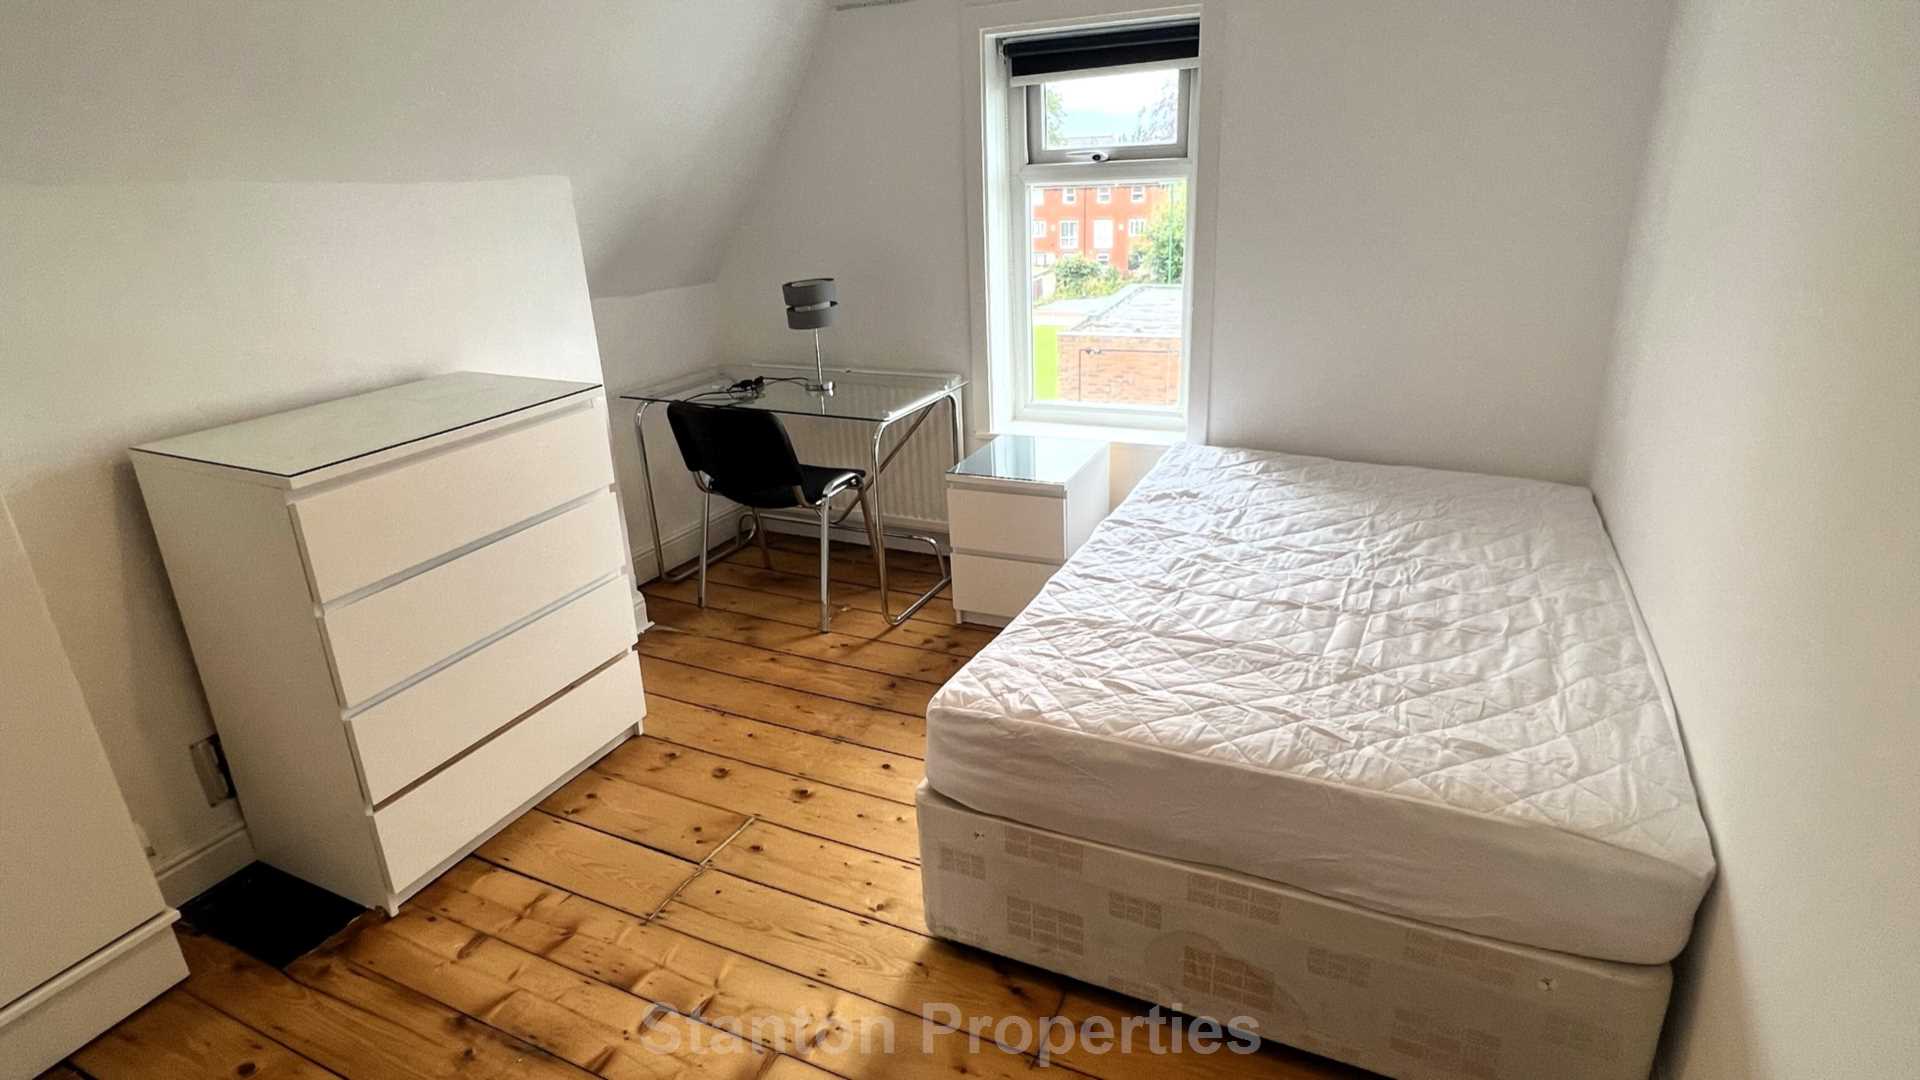 £150 PER WEEK / £650 PER MONTH, Lombard Grove, Manchester, Image 9